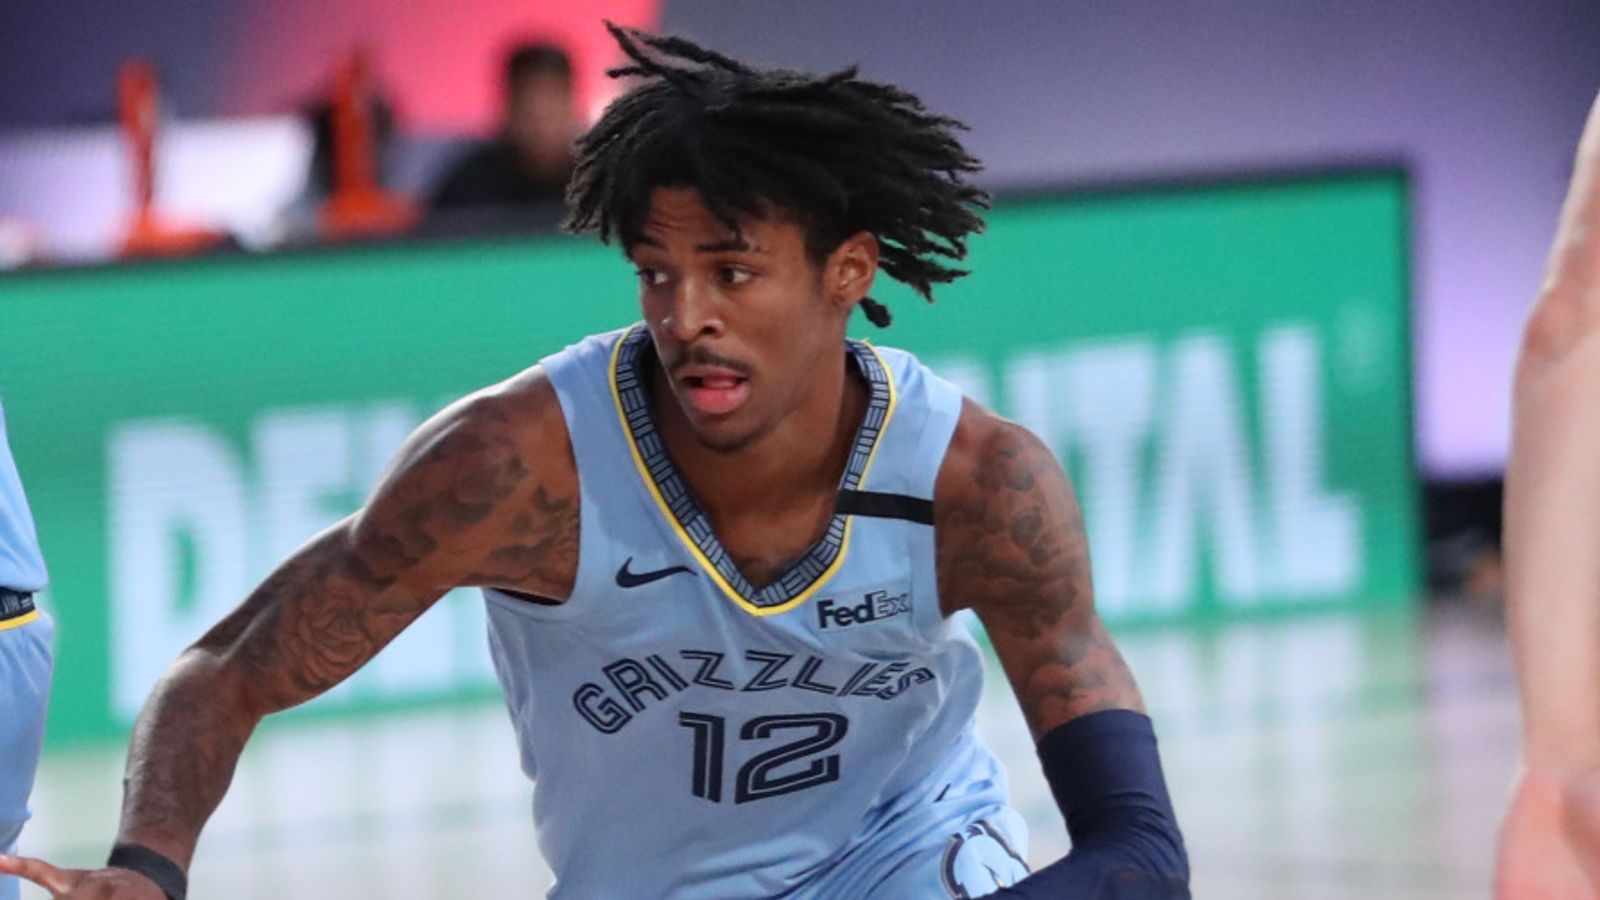 A Ja Morant 2019 rookie '2nd career win' Memphis Grizzlies game